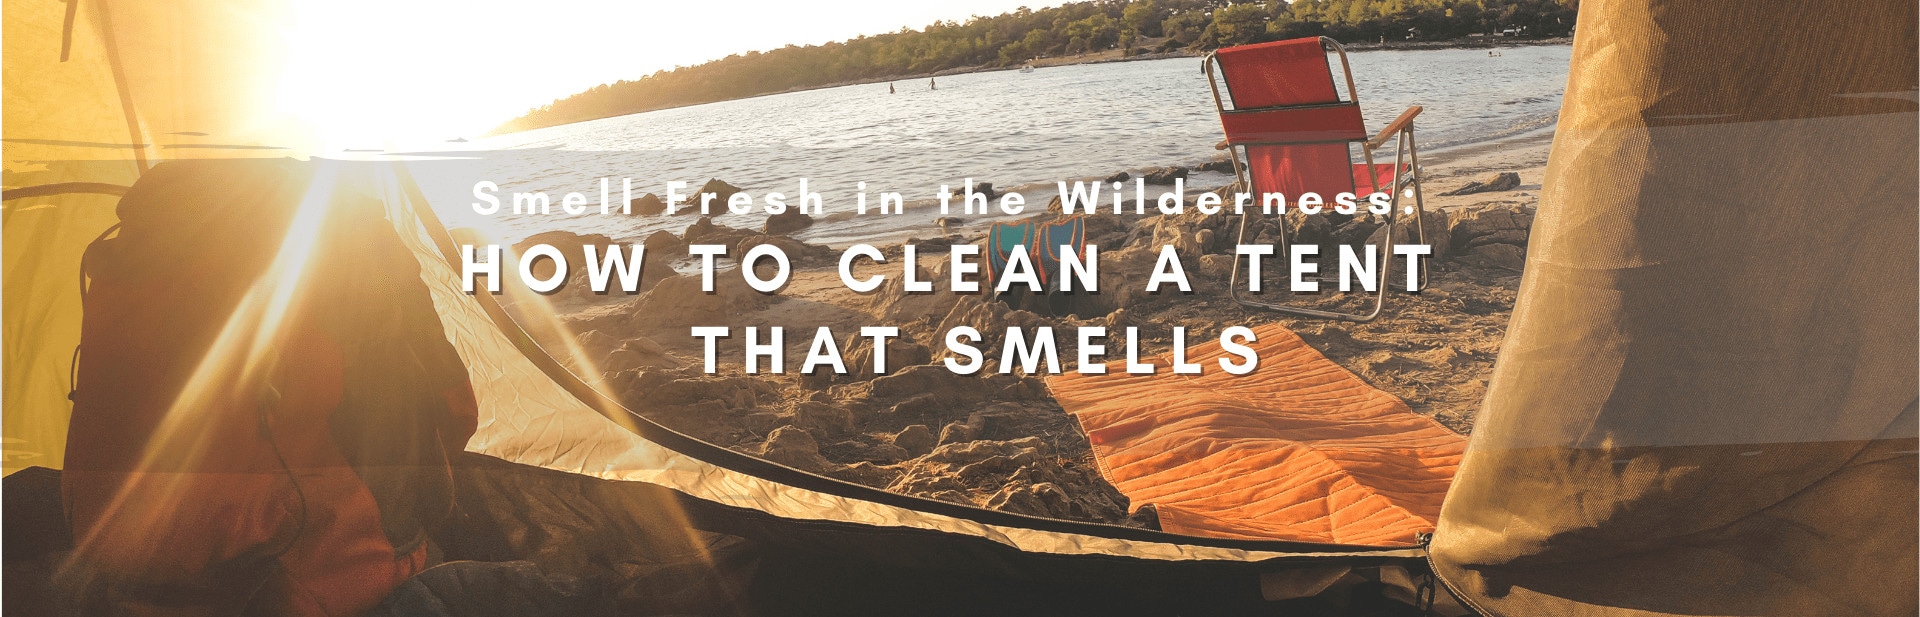 Smell Fresh in the Wilderness: How to Clean a Tent that Smells